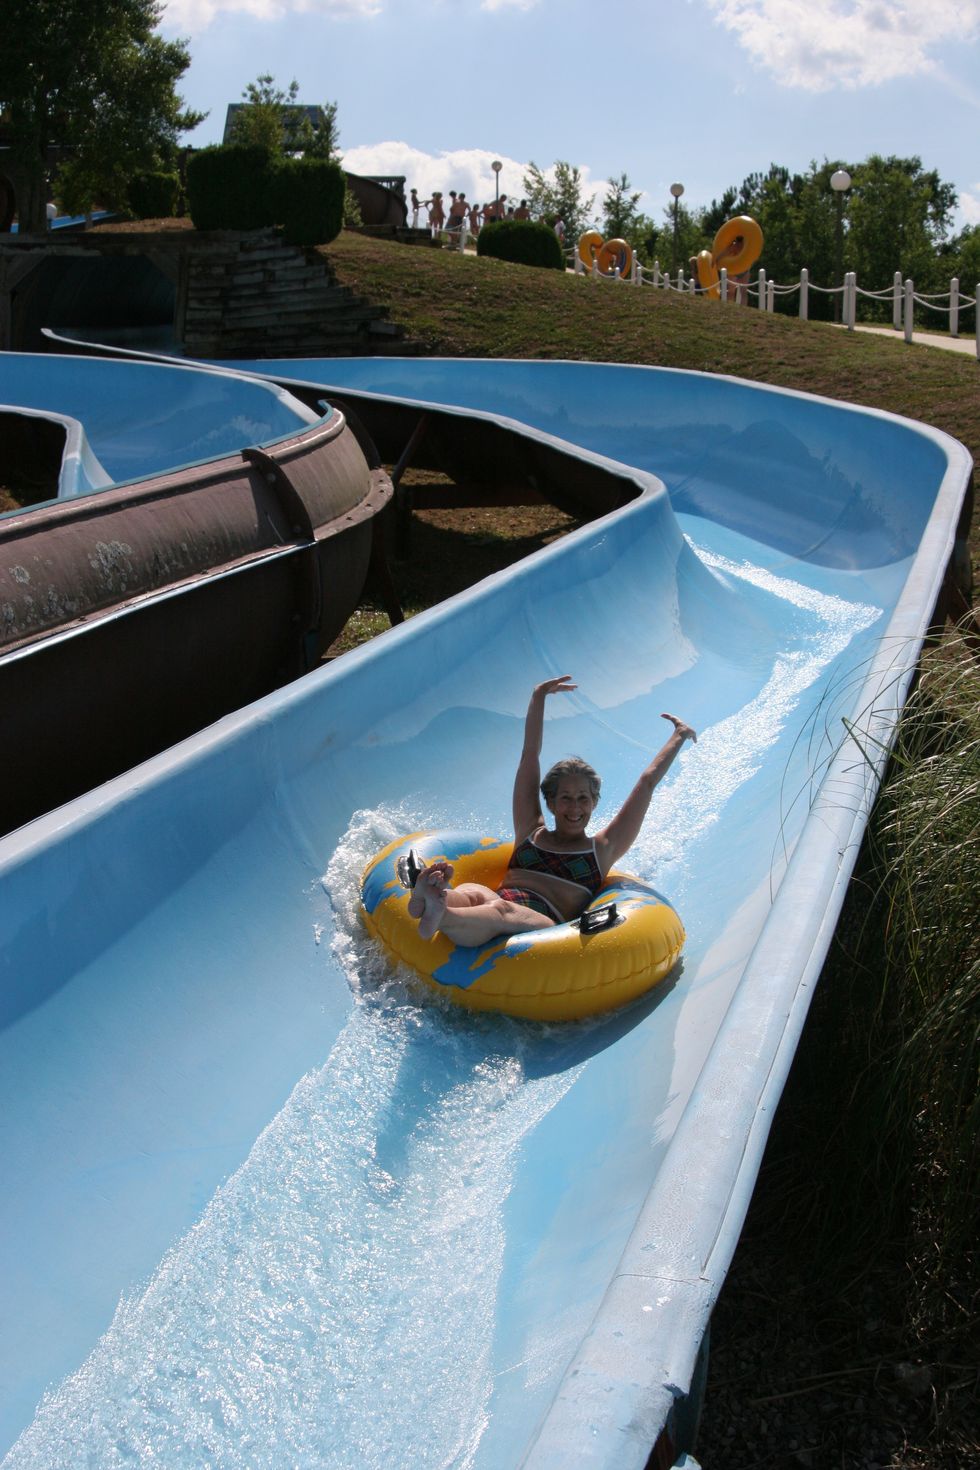 Theme Parks Near Me, Top Things To Do